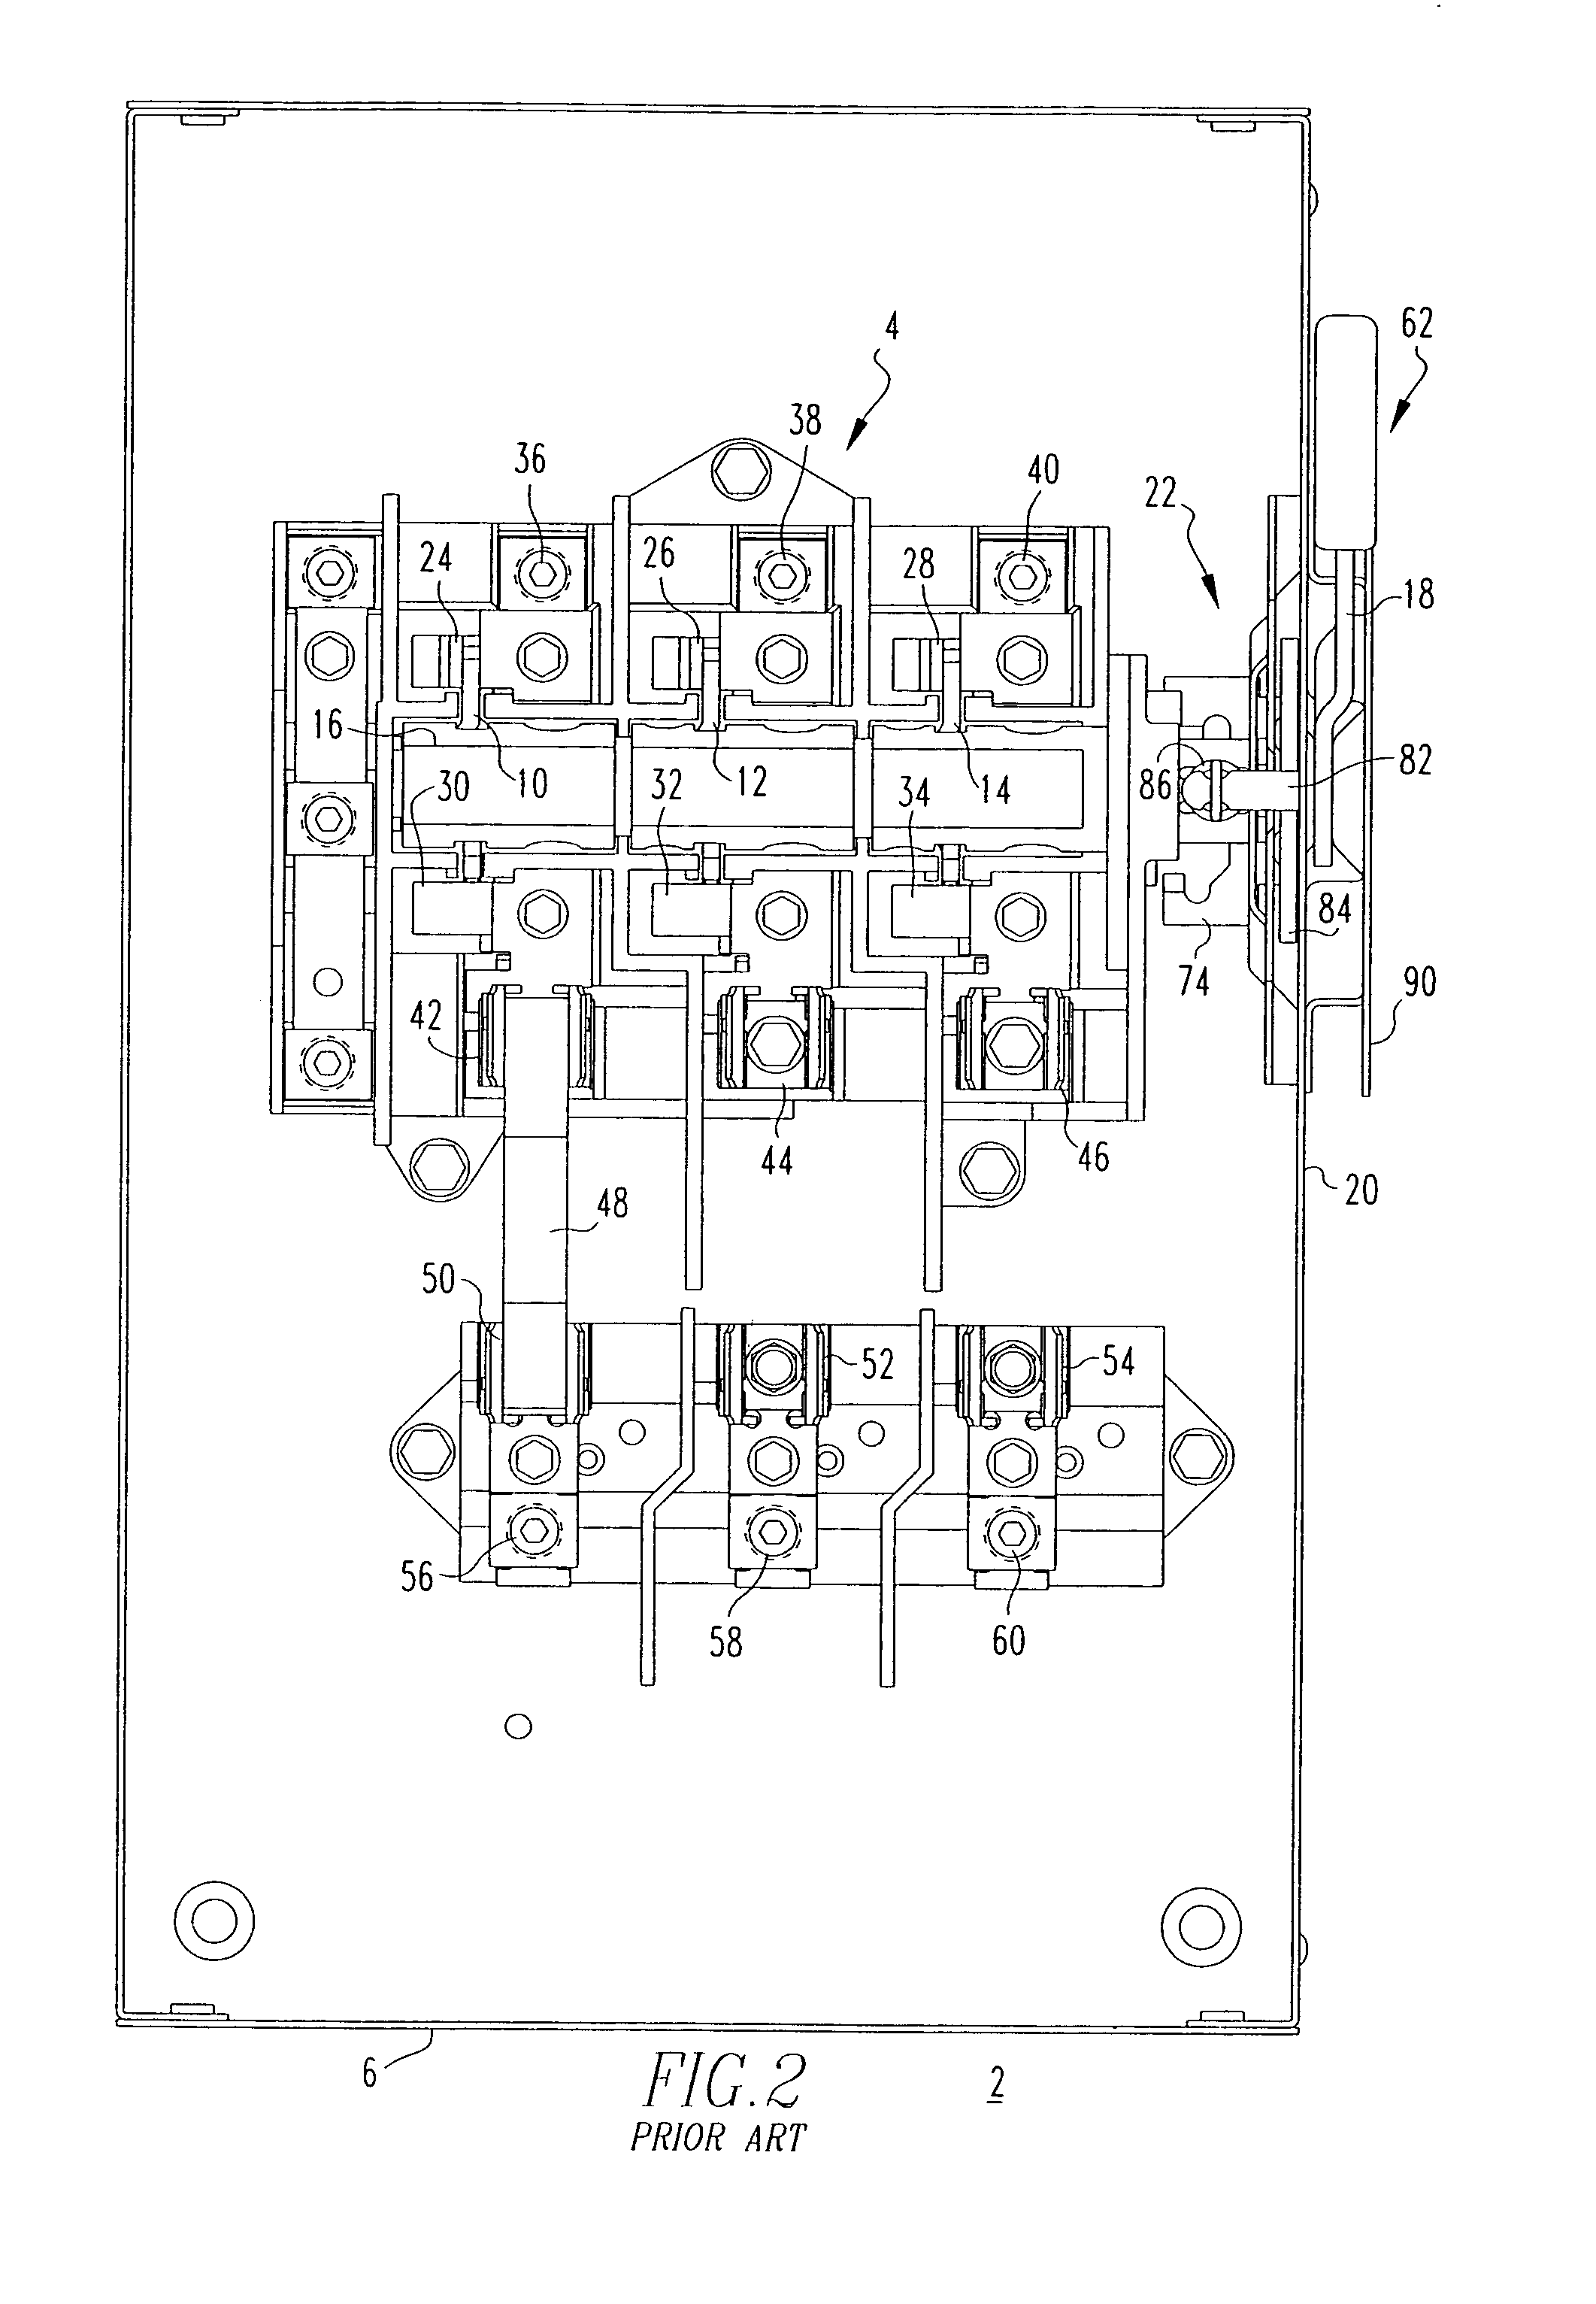 Interlock assembly and safety switch employing the same